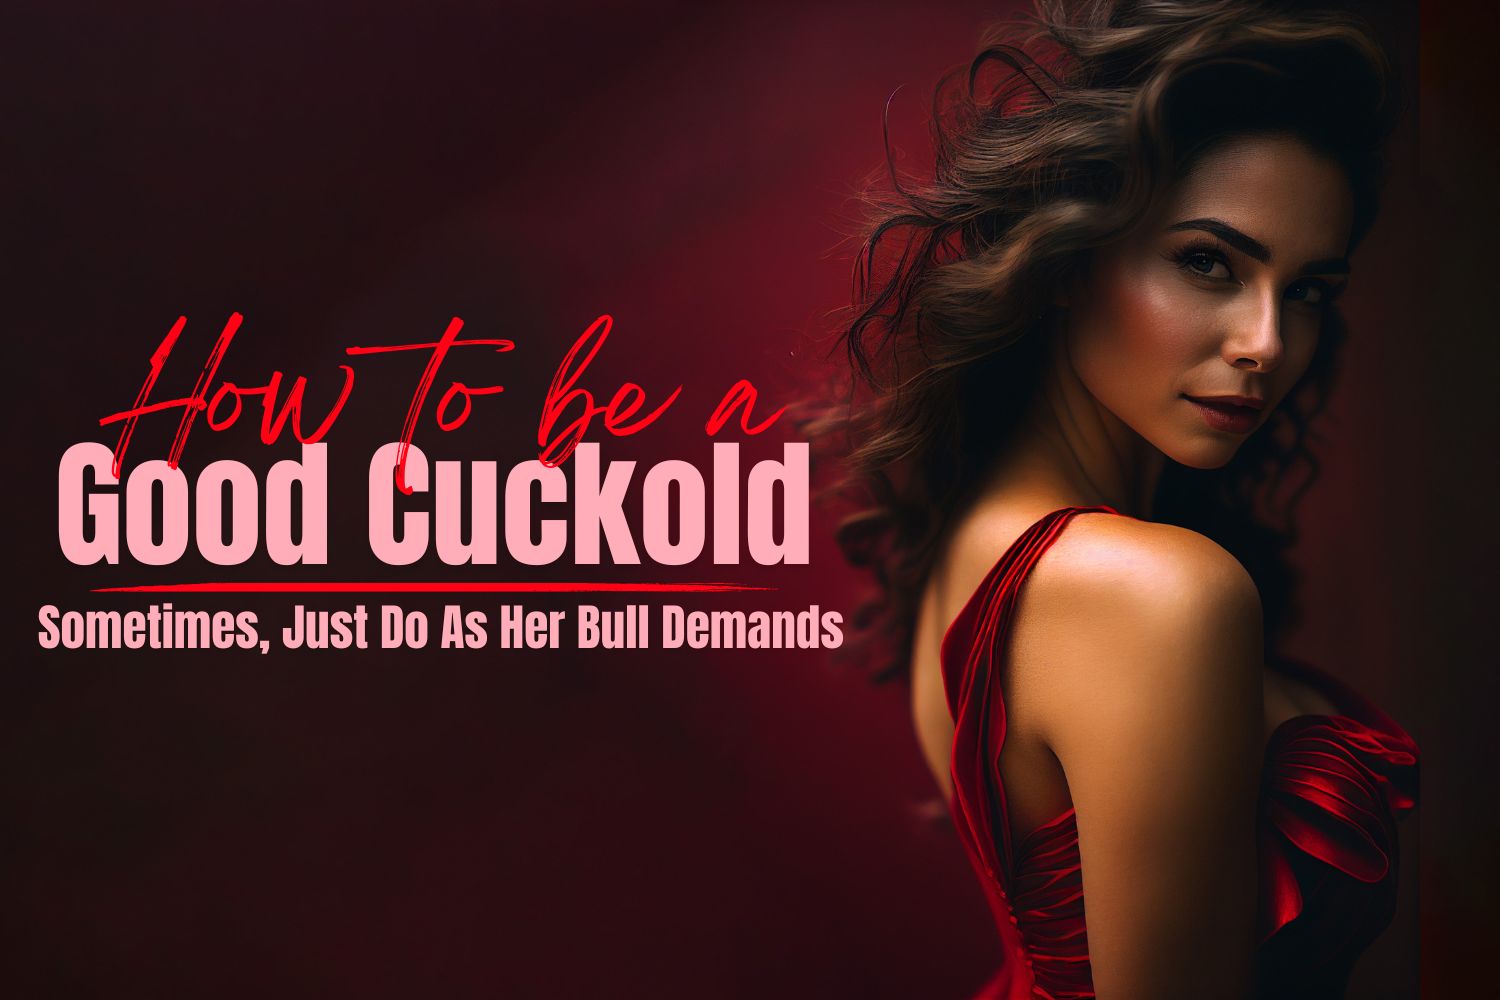 dhruv kaul recommends How To Be A Good Cuck